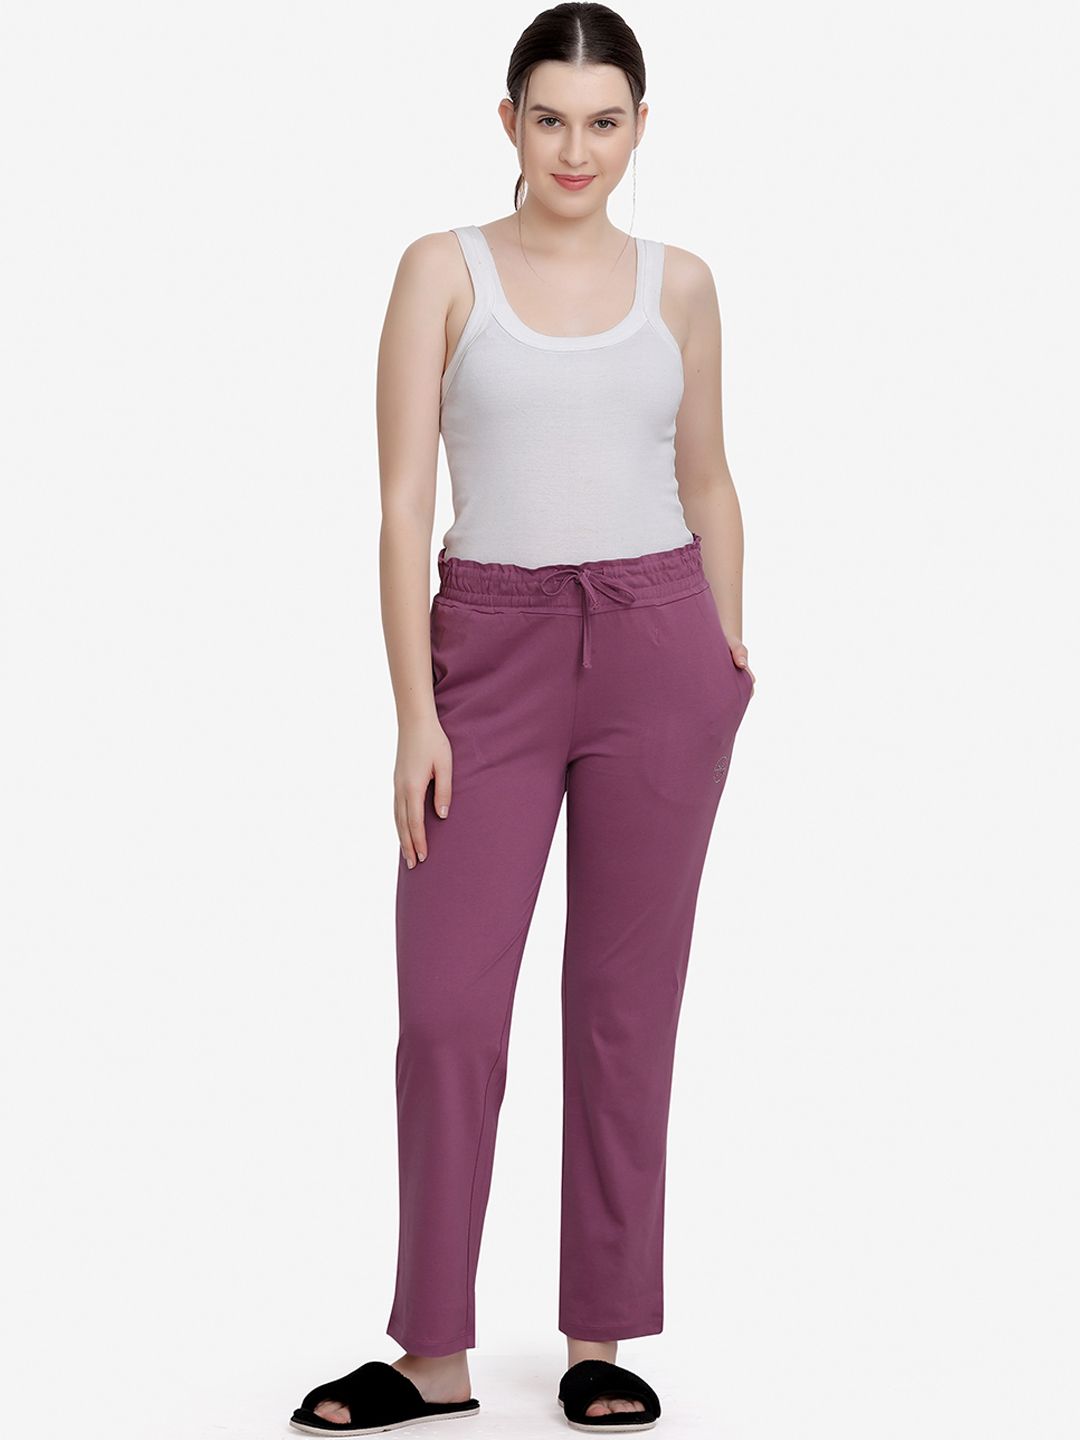 MAYSIXTY Women Purple Solid Slim-Fit Cotton Lounge Pants Price in India